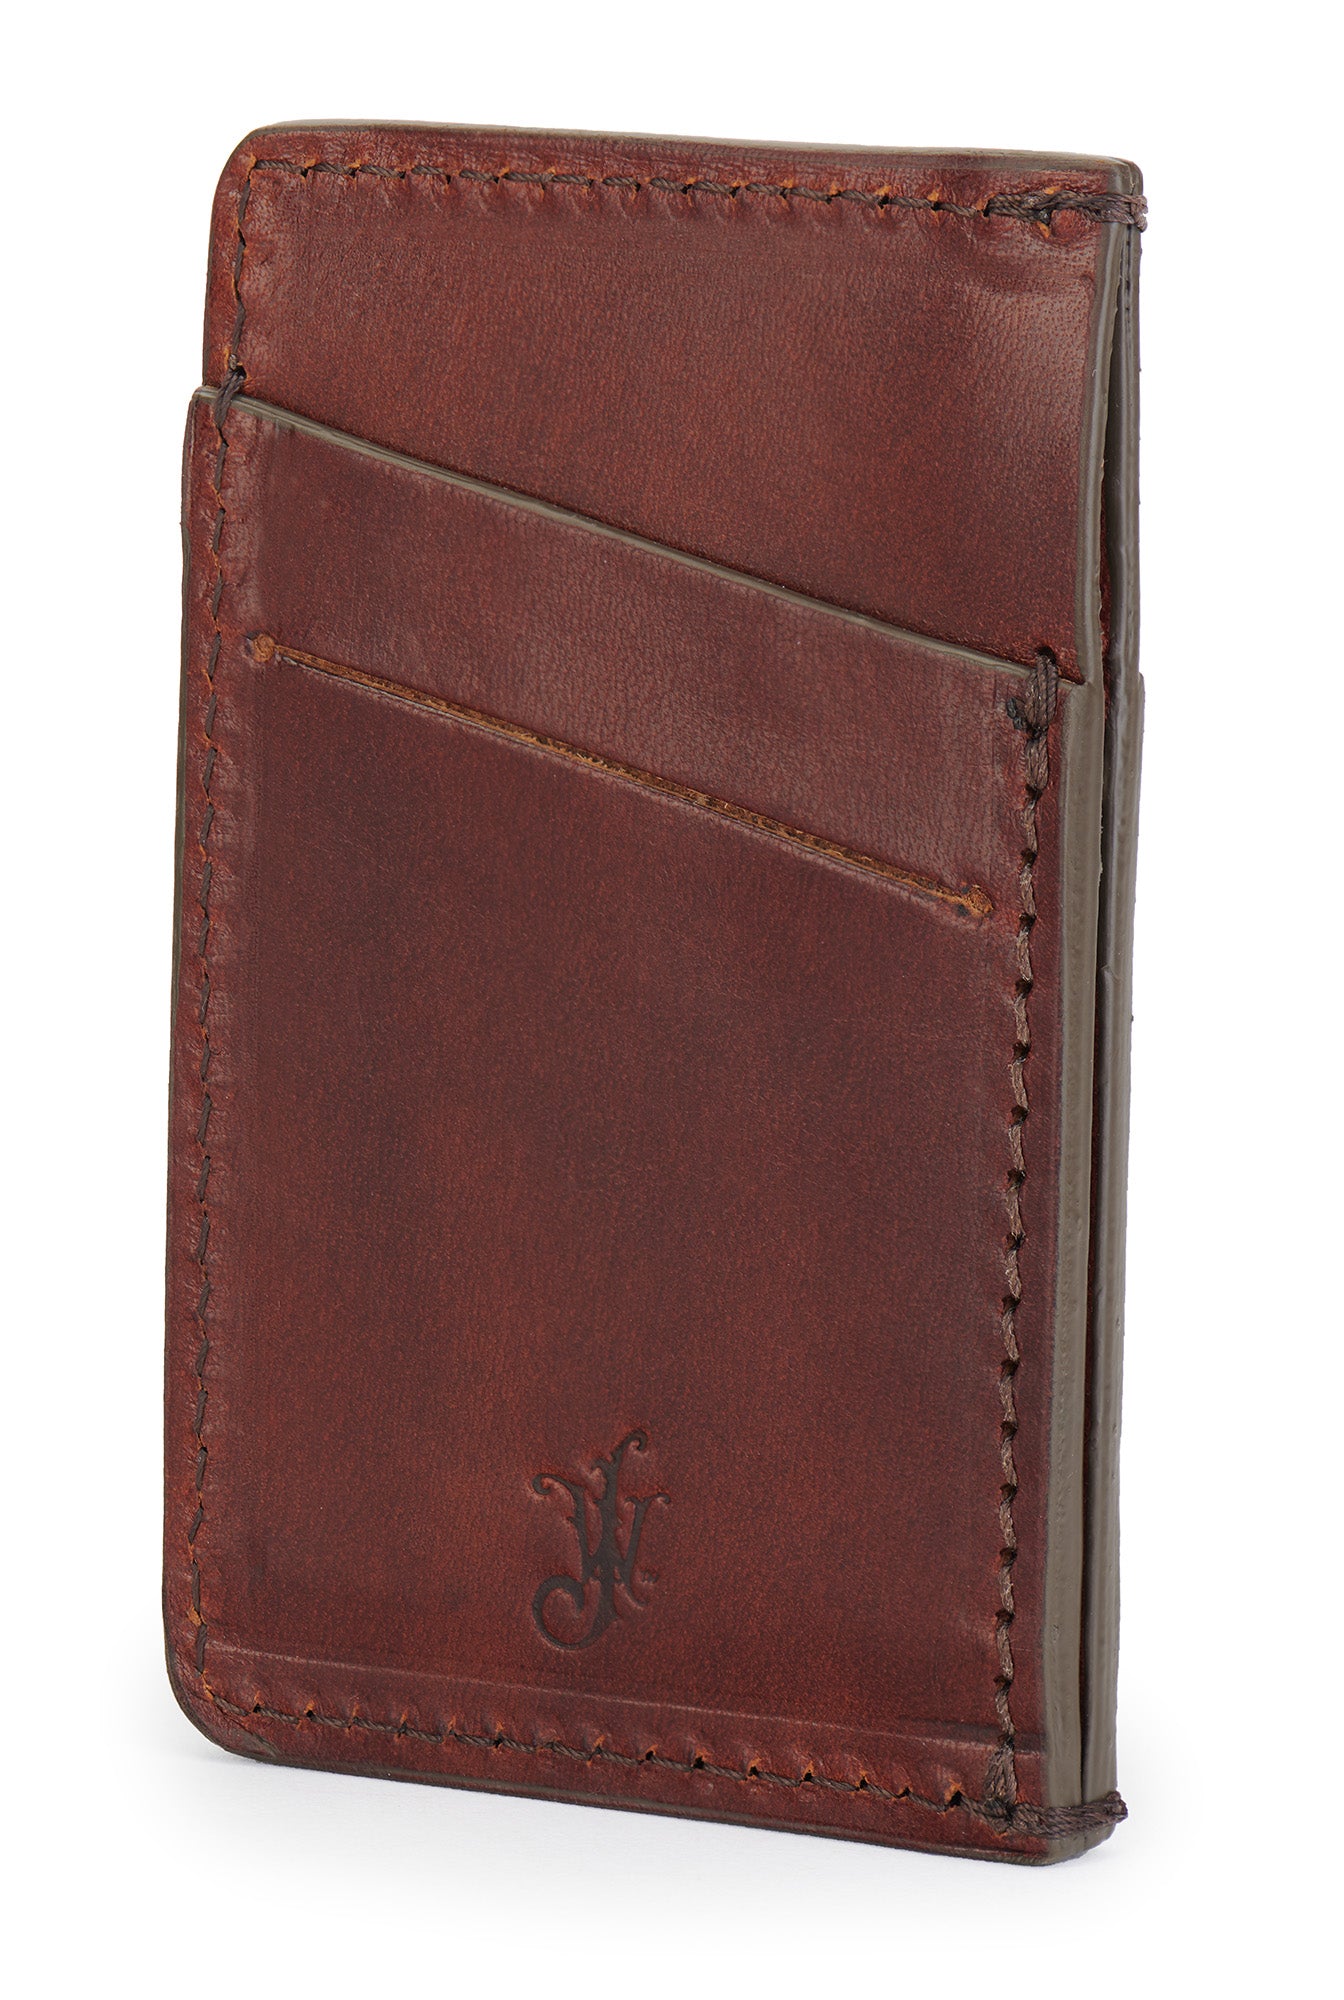 vegetable tanned bridle leather minimalist wallet back angle empty pictured in vintage brown